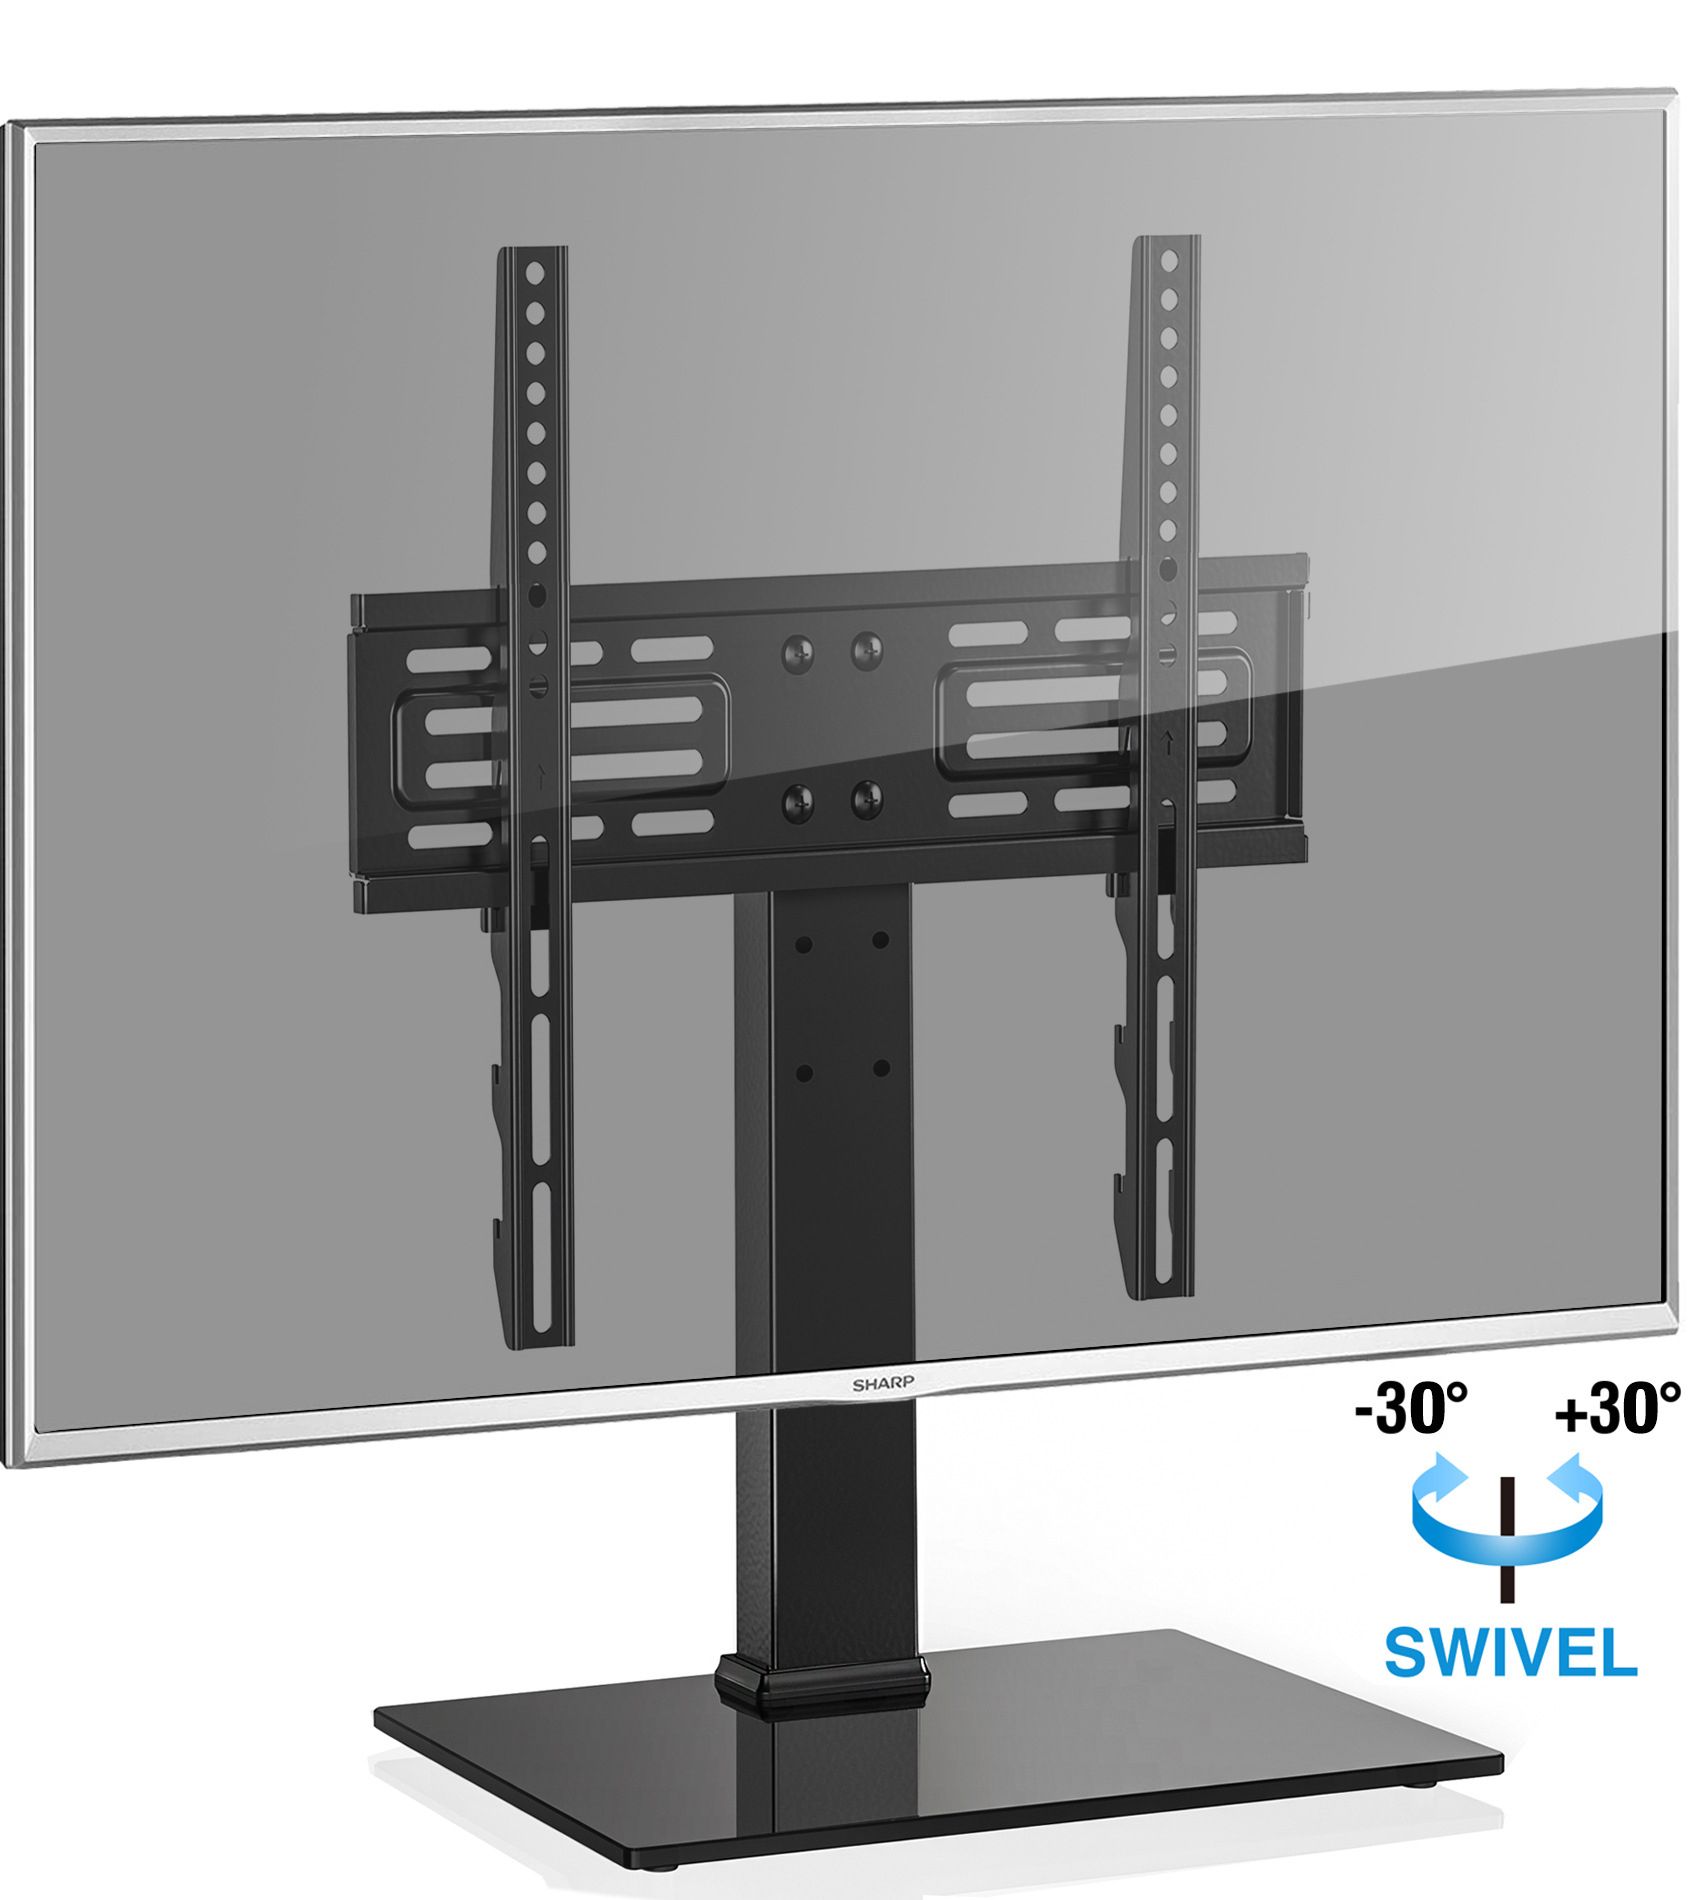 Fitueyes Universal Tv Stand For 27 Inch To 55 Inches Flat Intended For Universal Flat Screen Tv Stands (View 7 of 15)